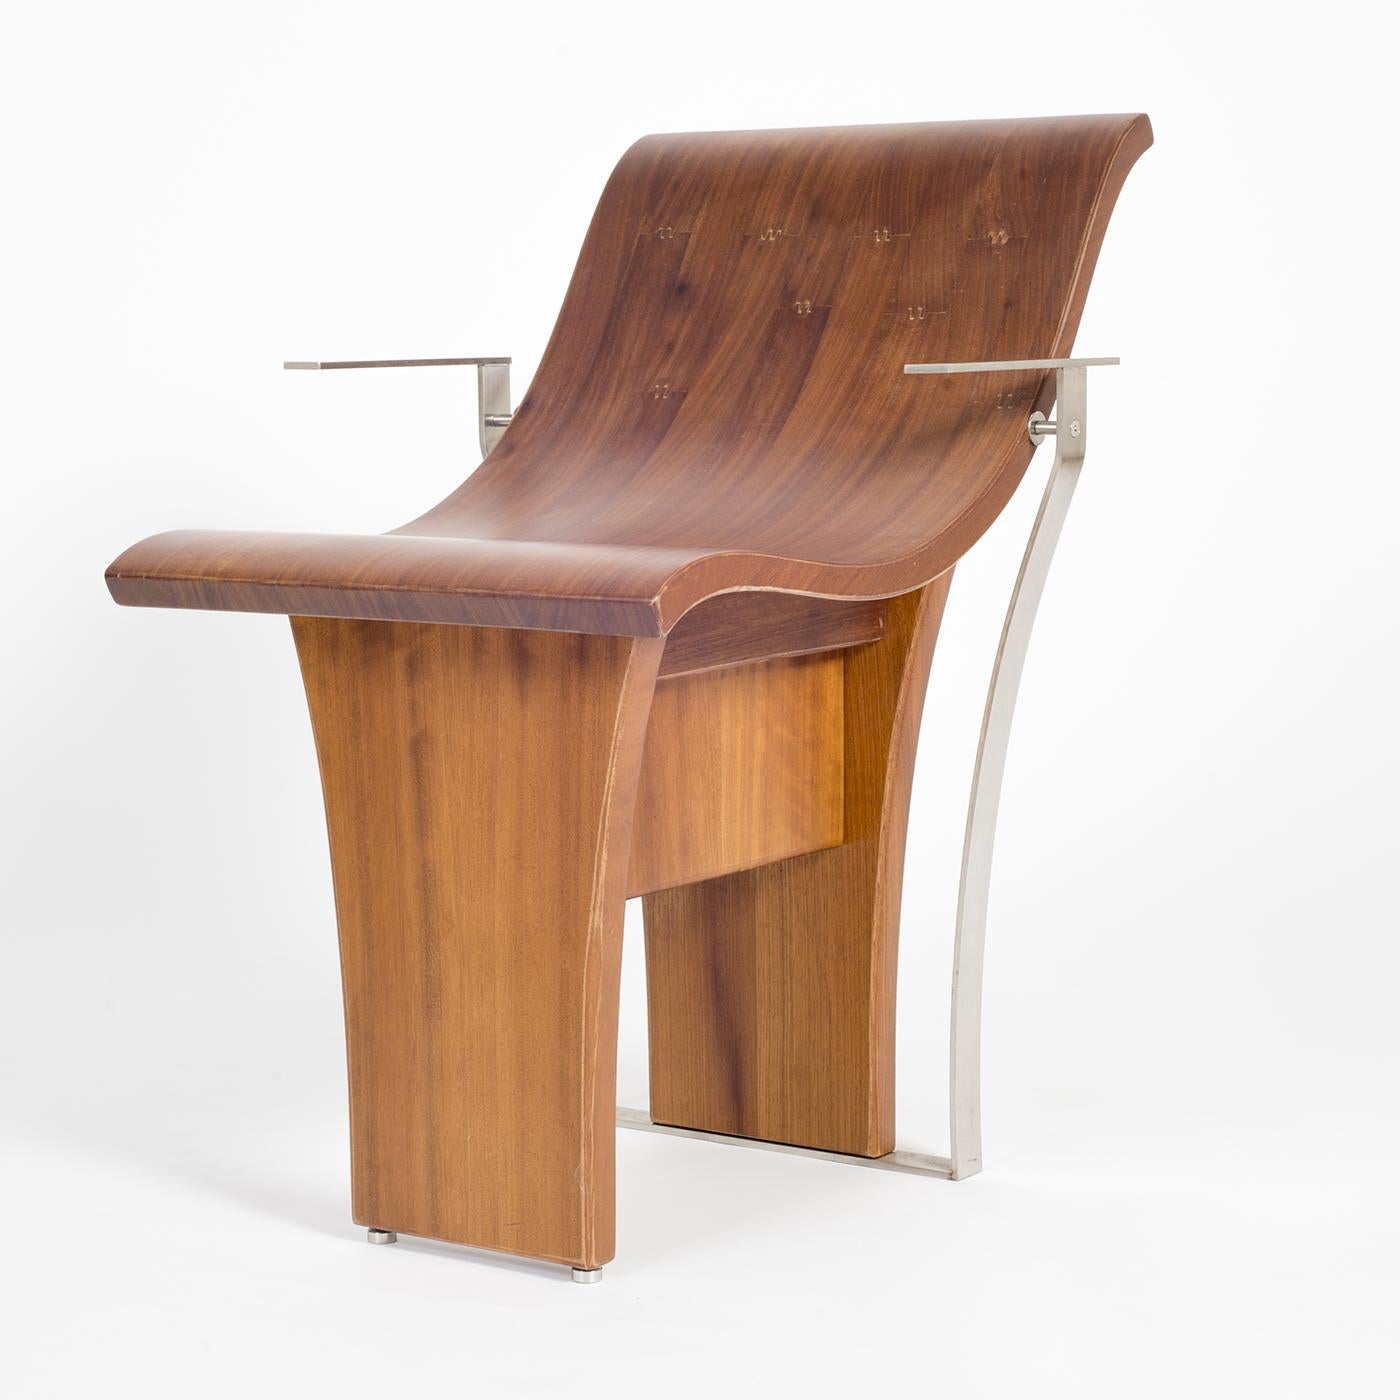 A study in form and function, this chair will infuse rustic, contemporary warmth into any interior. Made of solid iroko wood, this chair is marked by a wide seat, a delicately contoured low back, and dainty armrests in stainless steel: each design